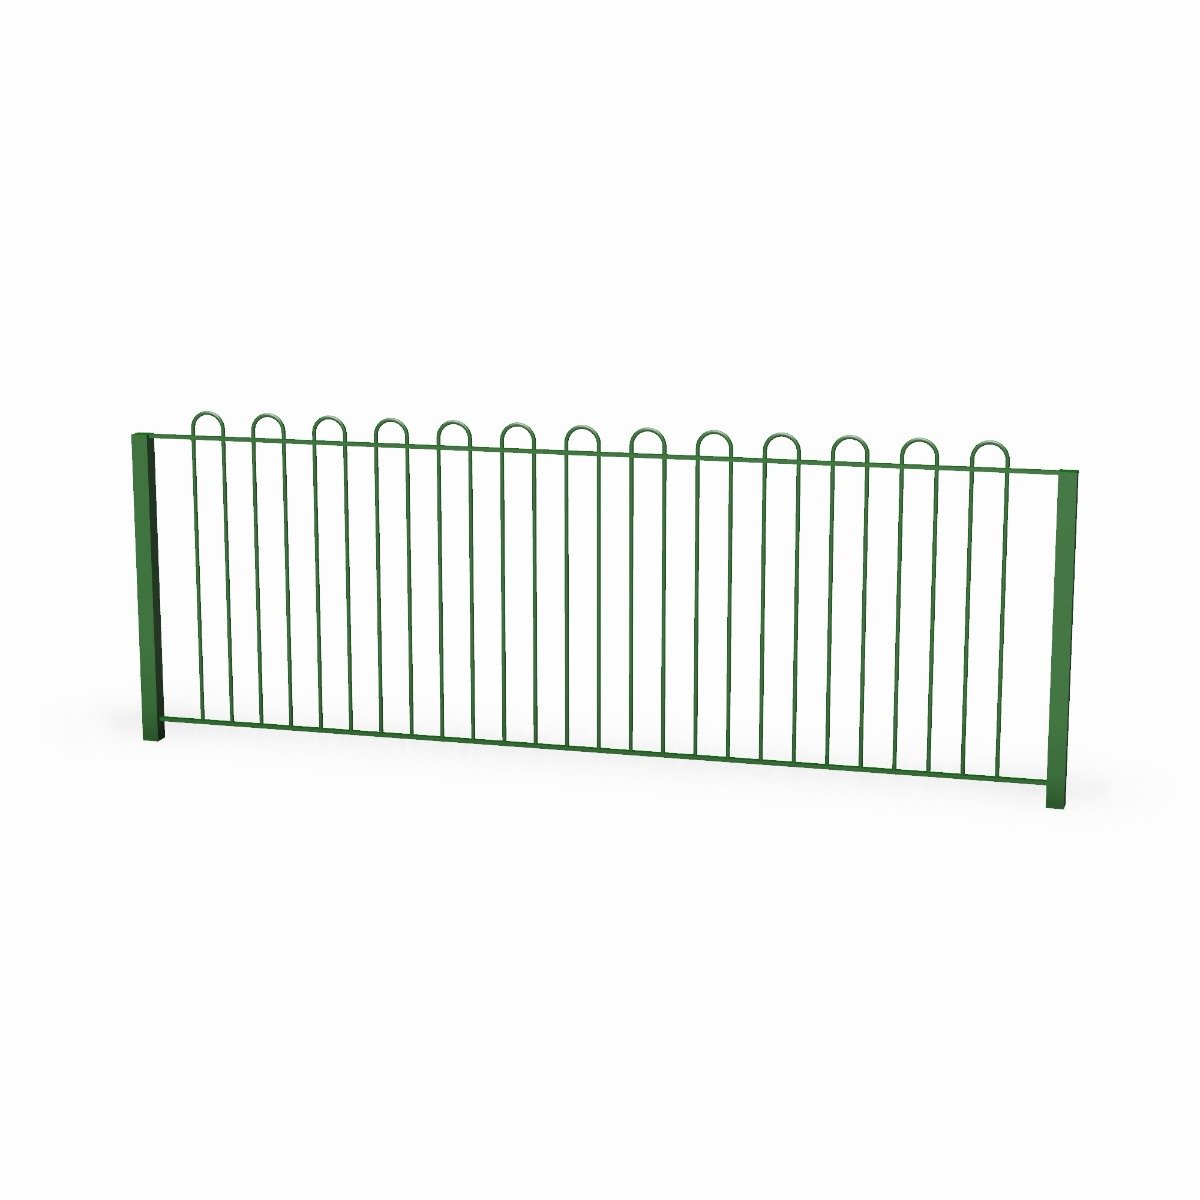 1m Steel Bow Topped Playground Fencing